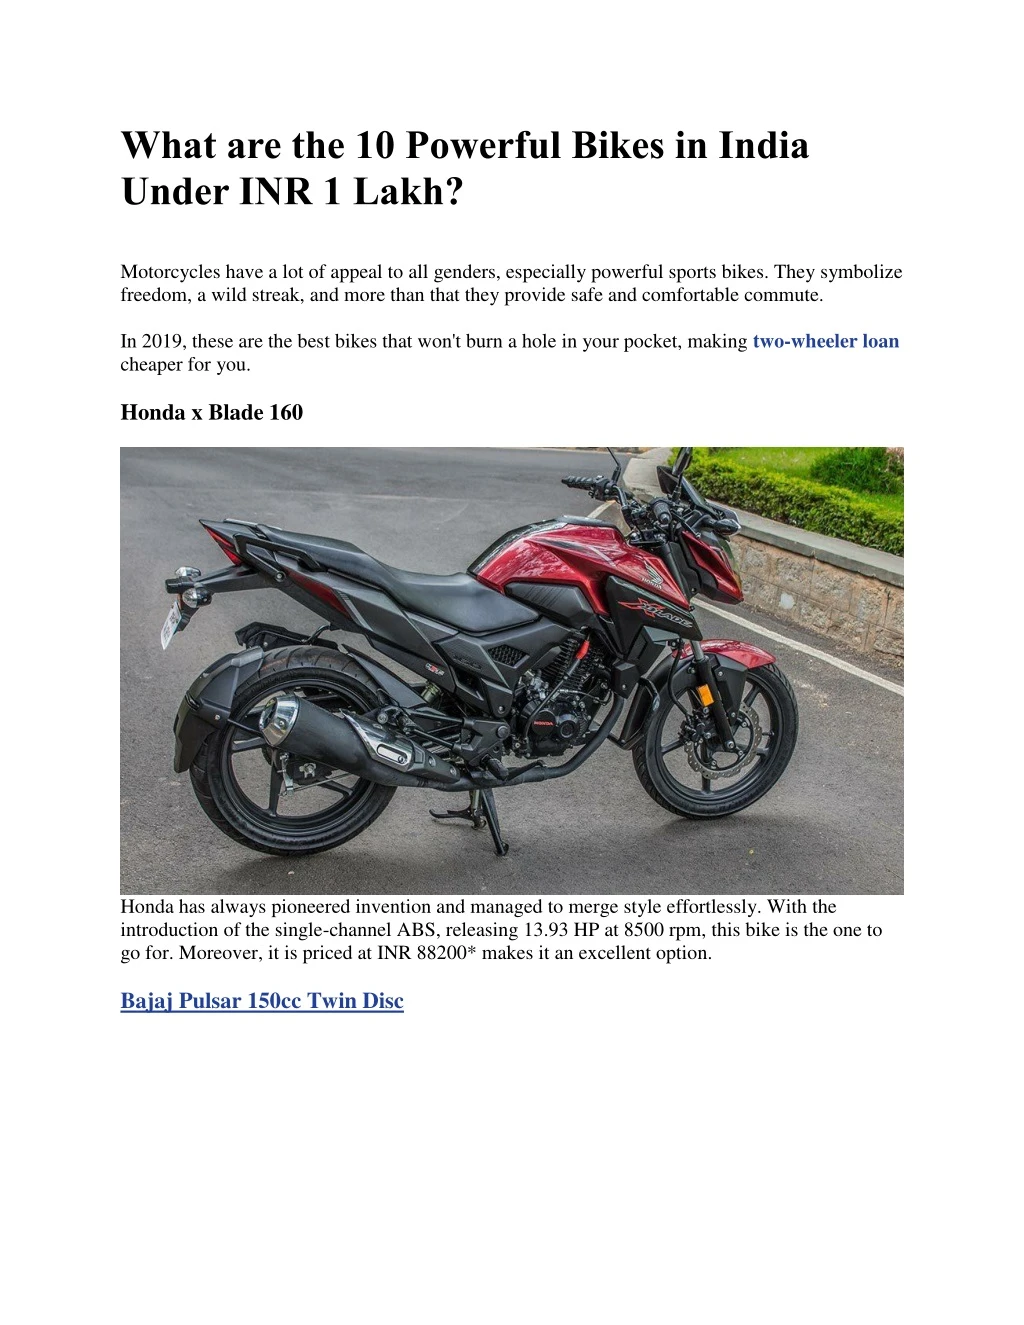 what are the 10 powerful bikes in india under